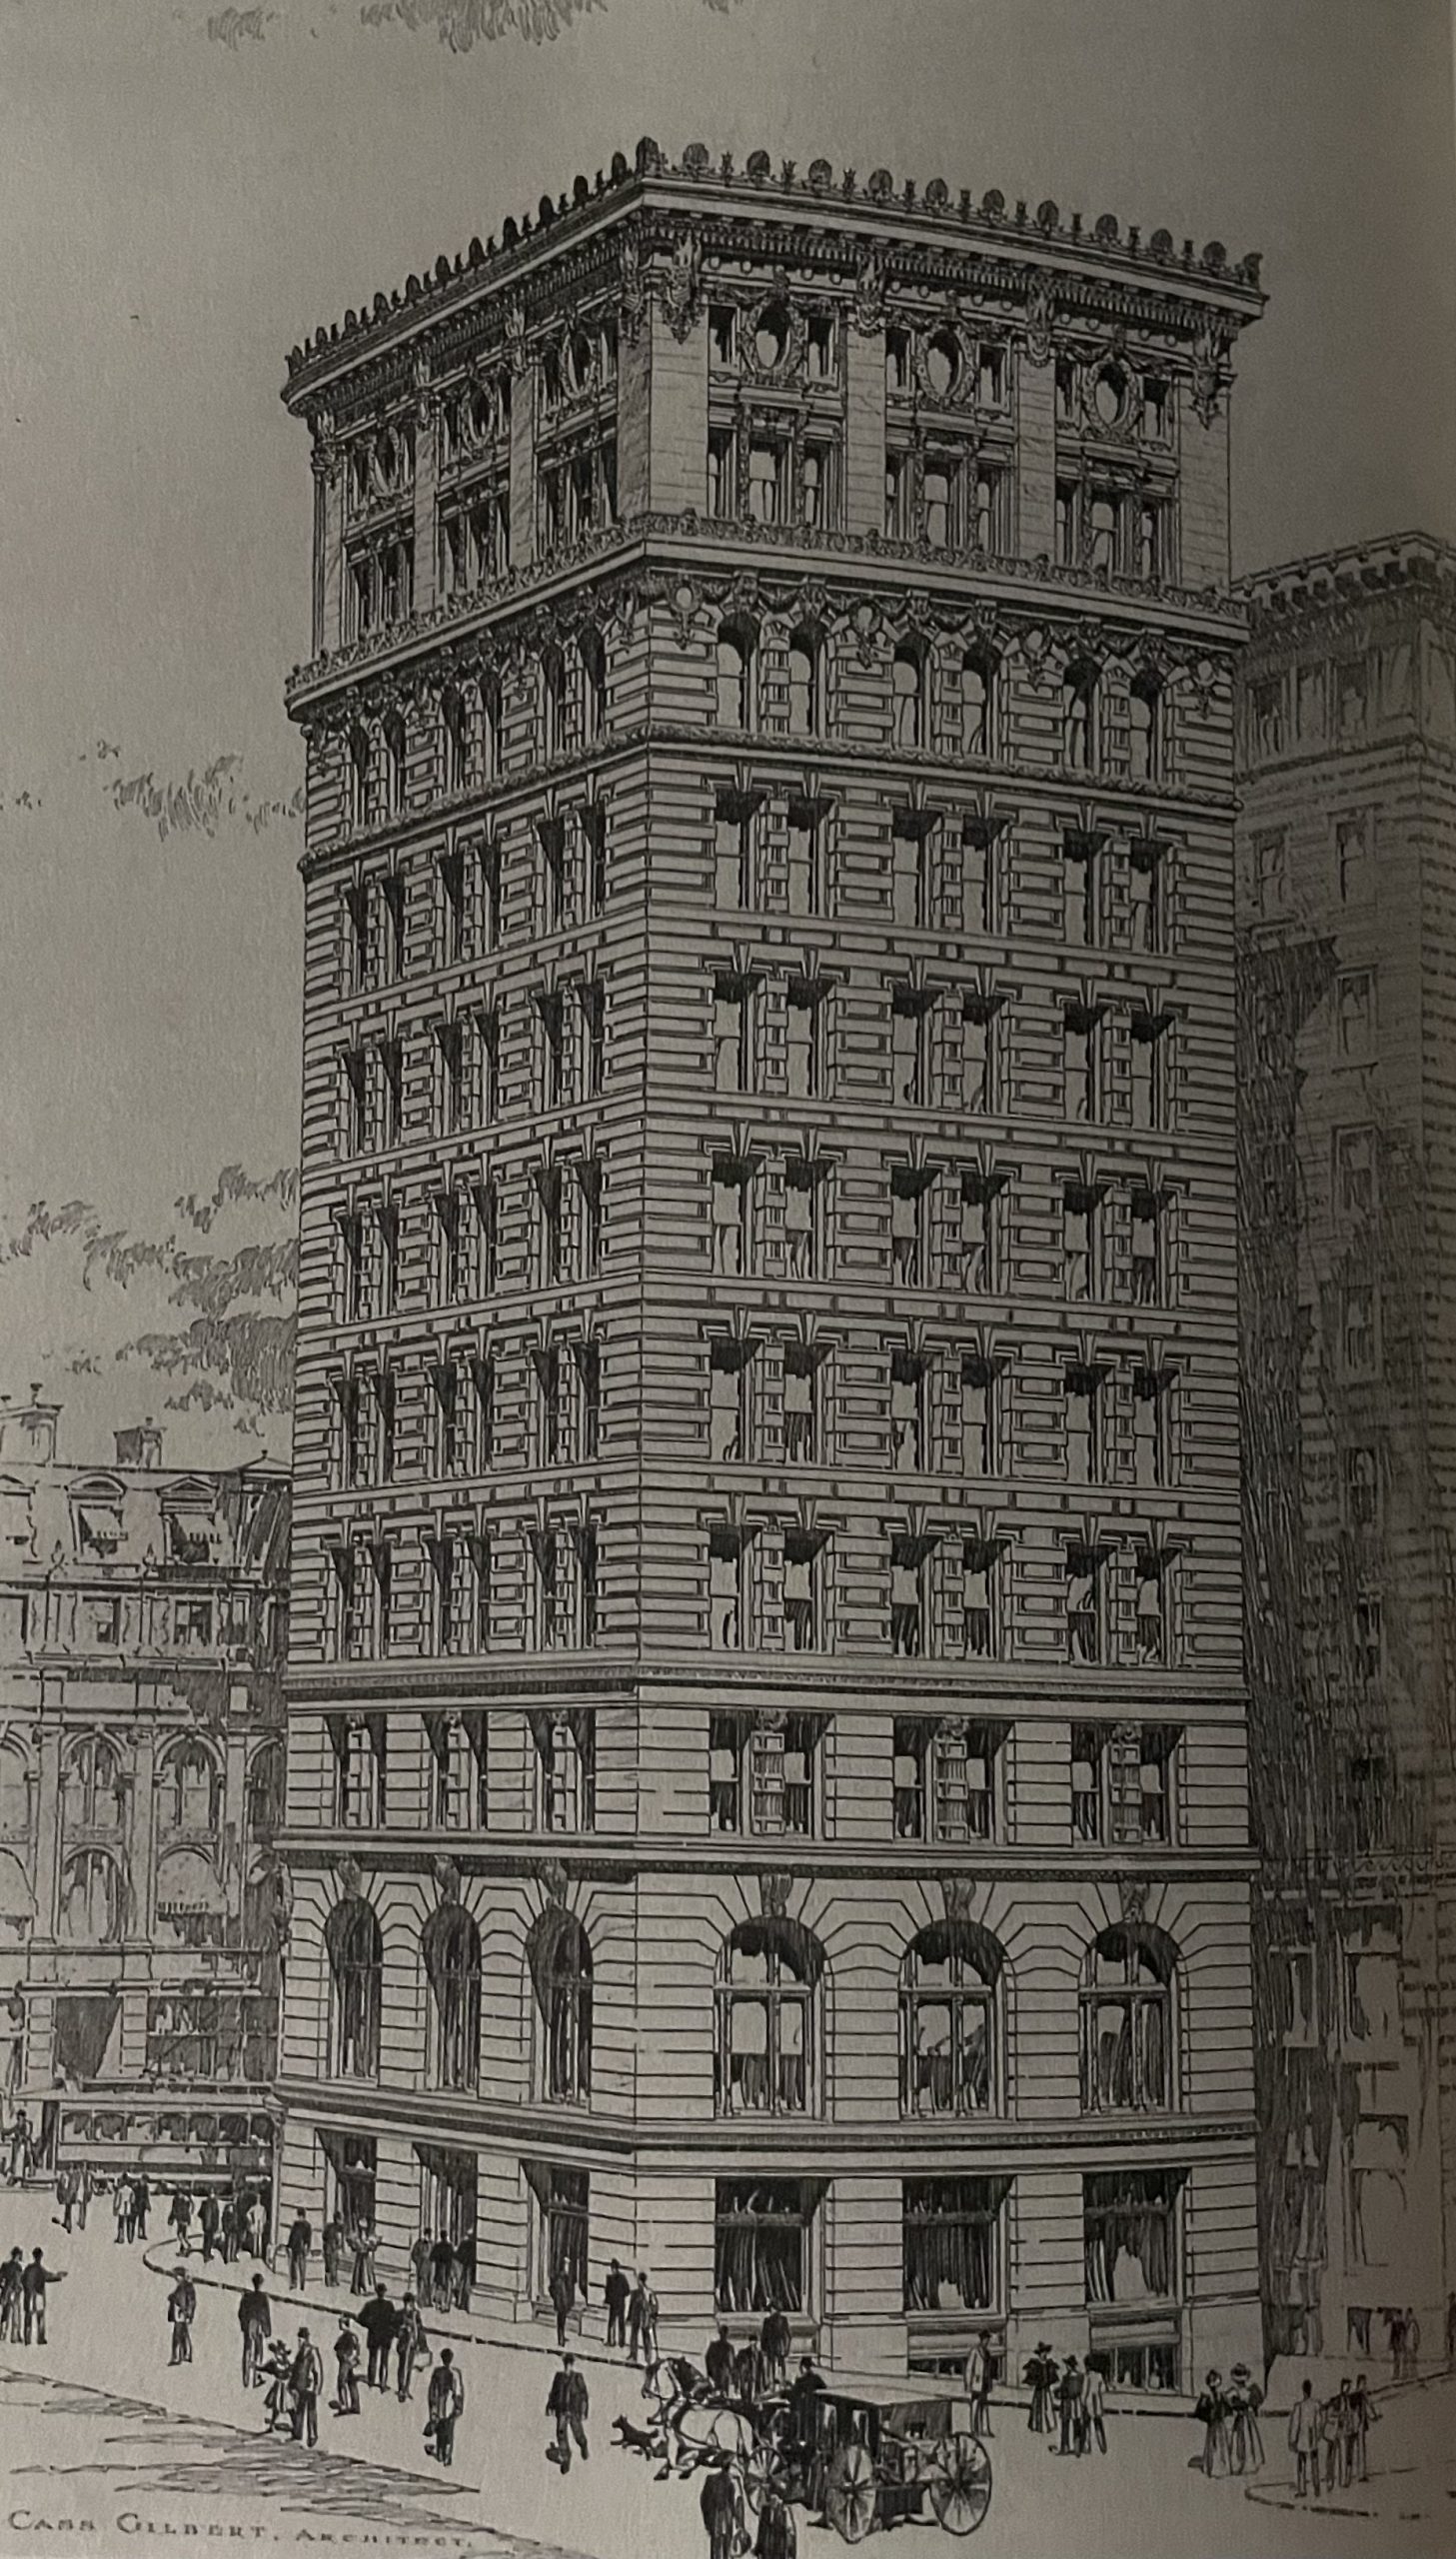 Figure 2. The Brazer Building in Boston. Designed by Cass Gilbert and completed in 1897.